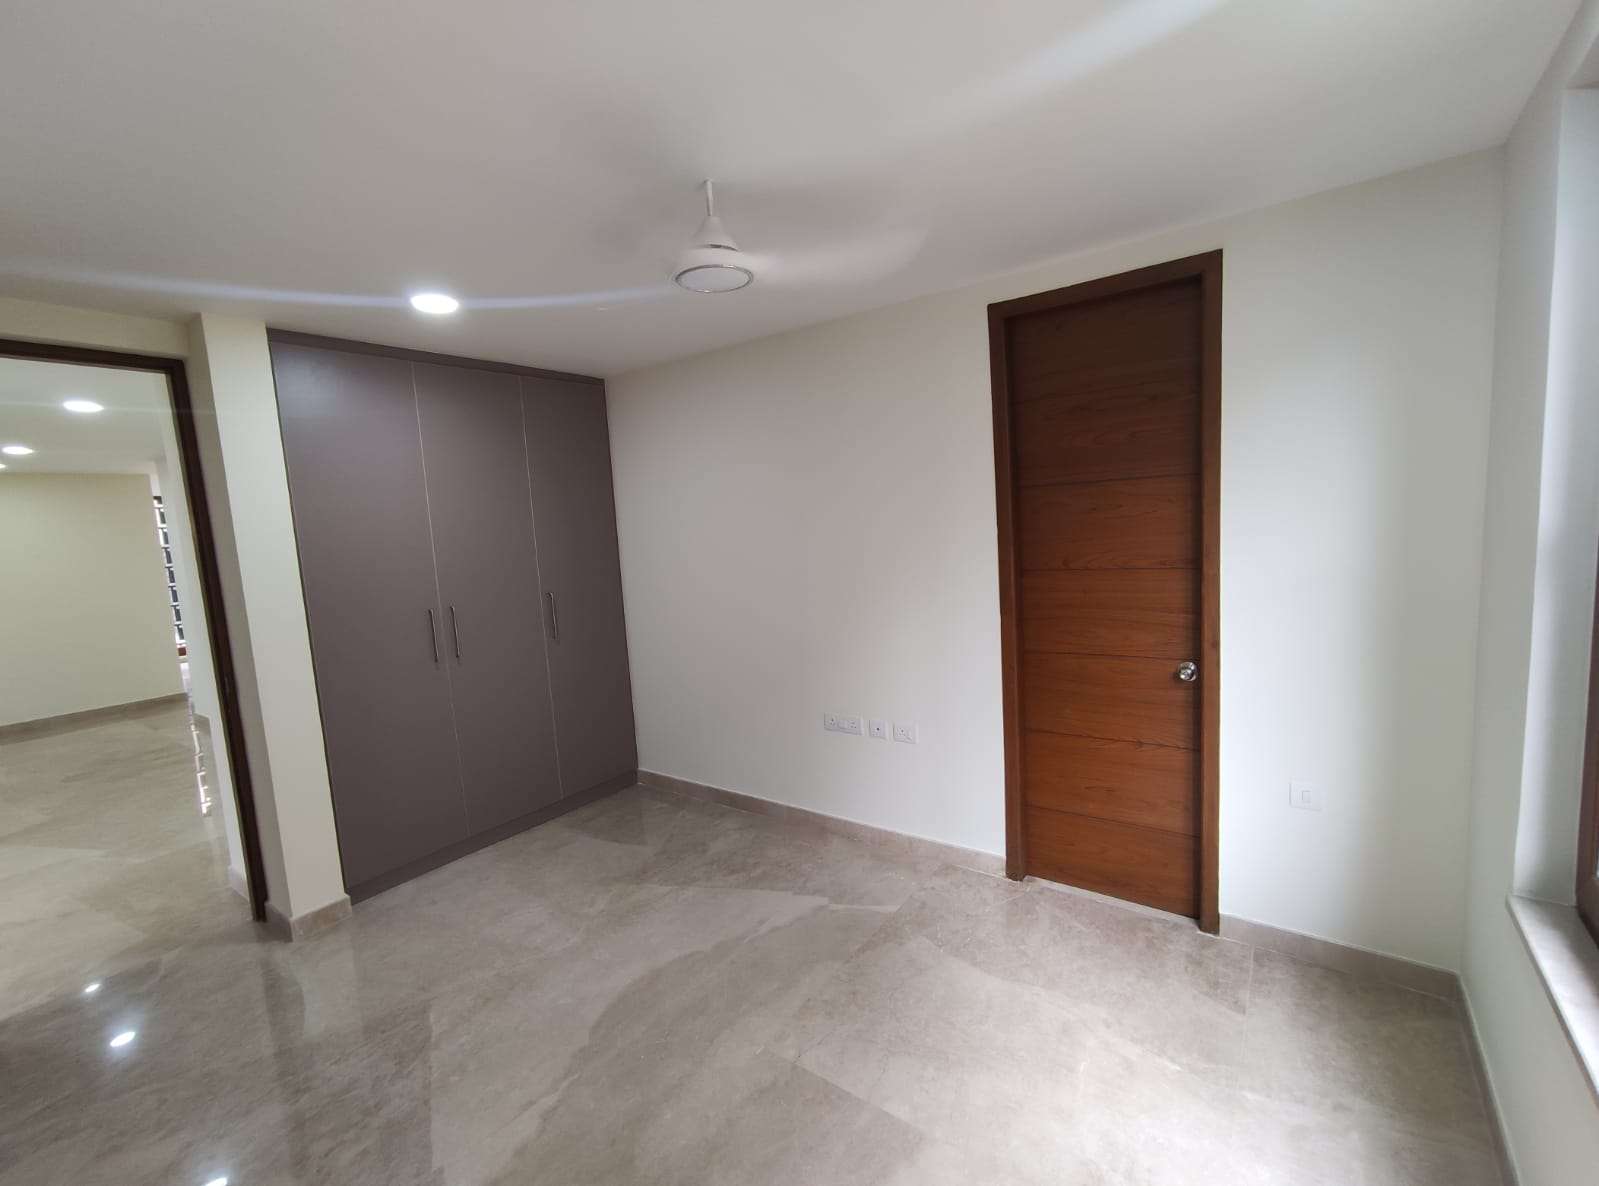 3BHK Flat for Rent in Bangalore - Indian Homes